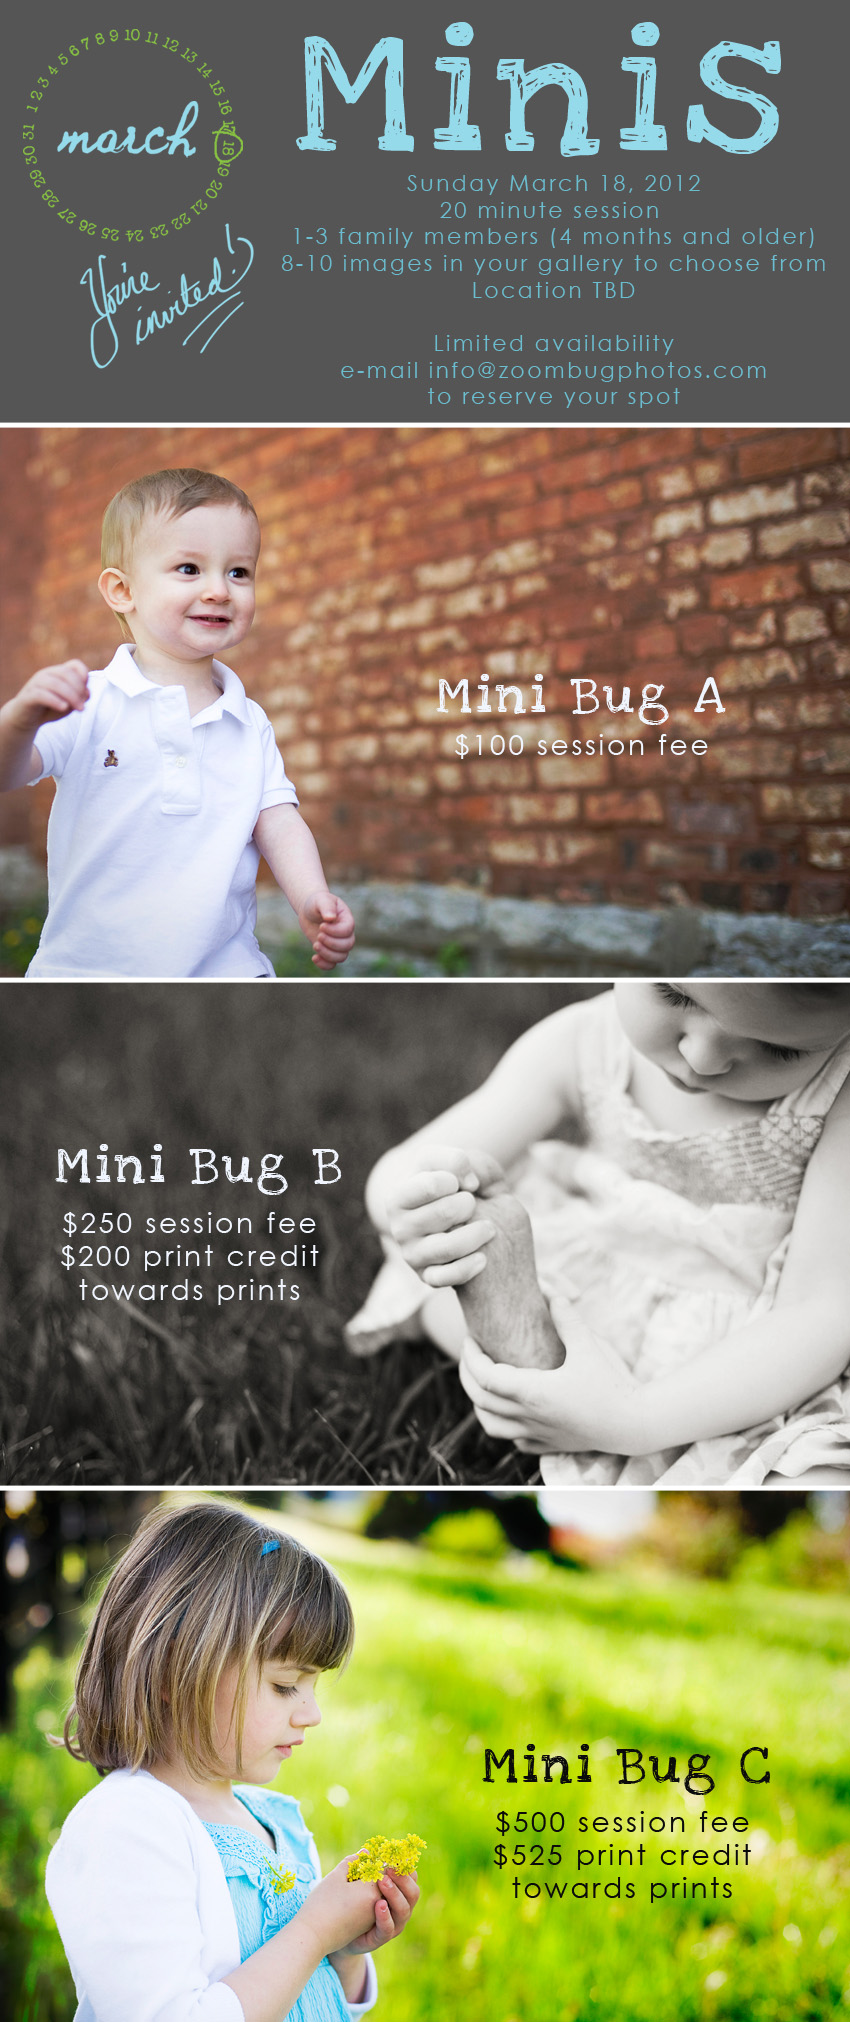 early-spring-mini-sessions